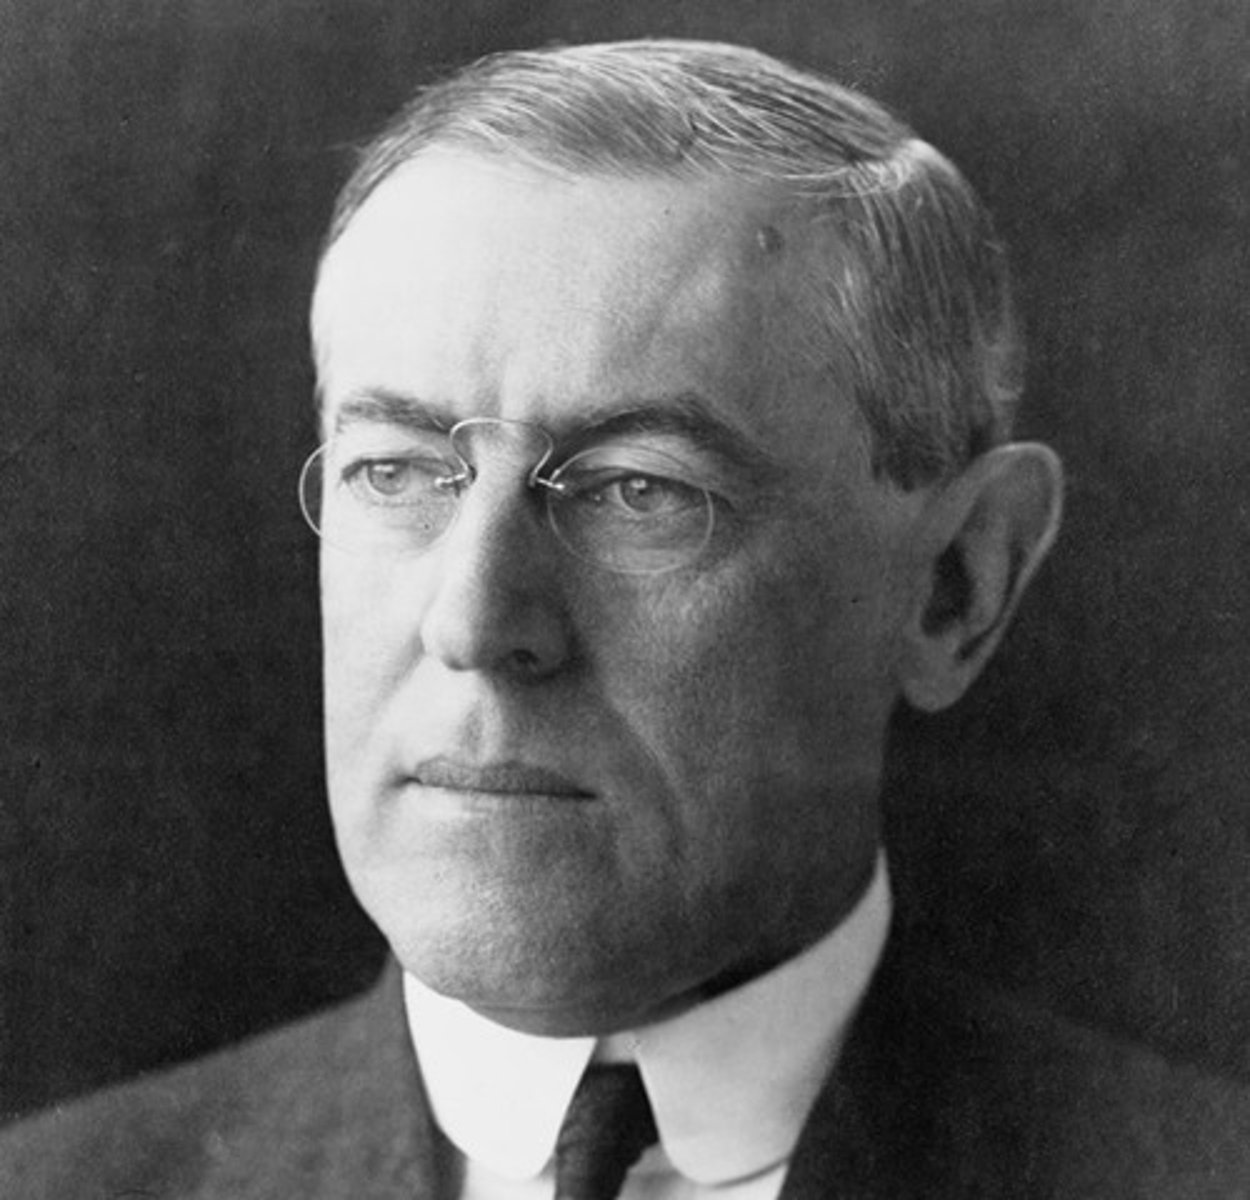 <p>(1856-1924) President of the United States (1913-1921) and the leading figure at the Paris Peace Conference of 1919. He was unable to persuade the U.S. Congress to ratify the Treaty of Versailles or join the League of Nations.</p>